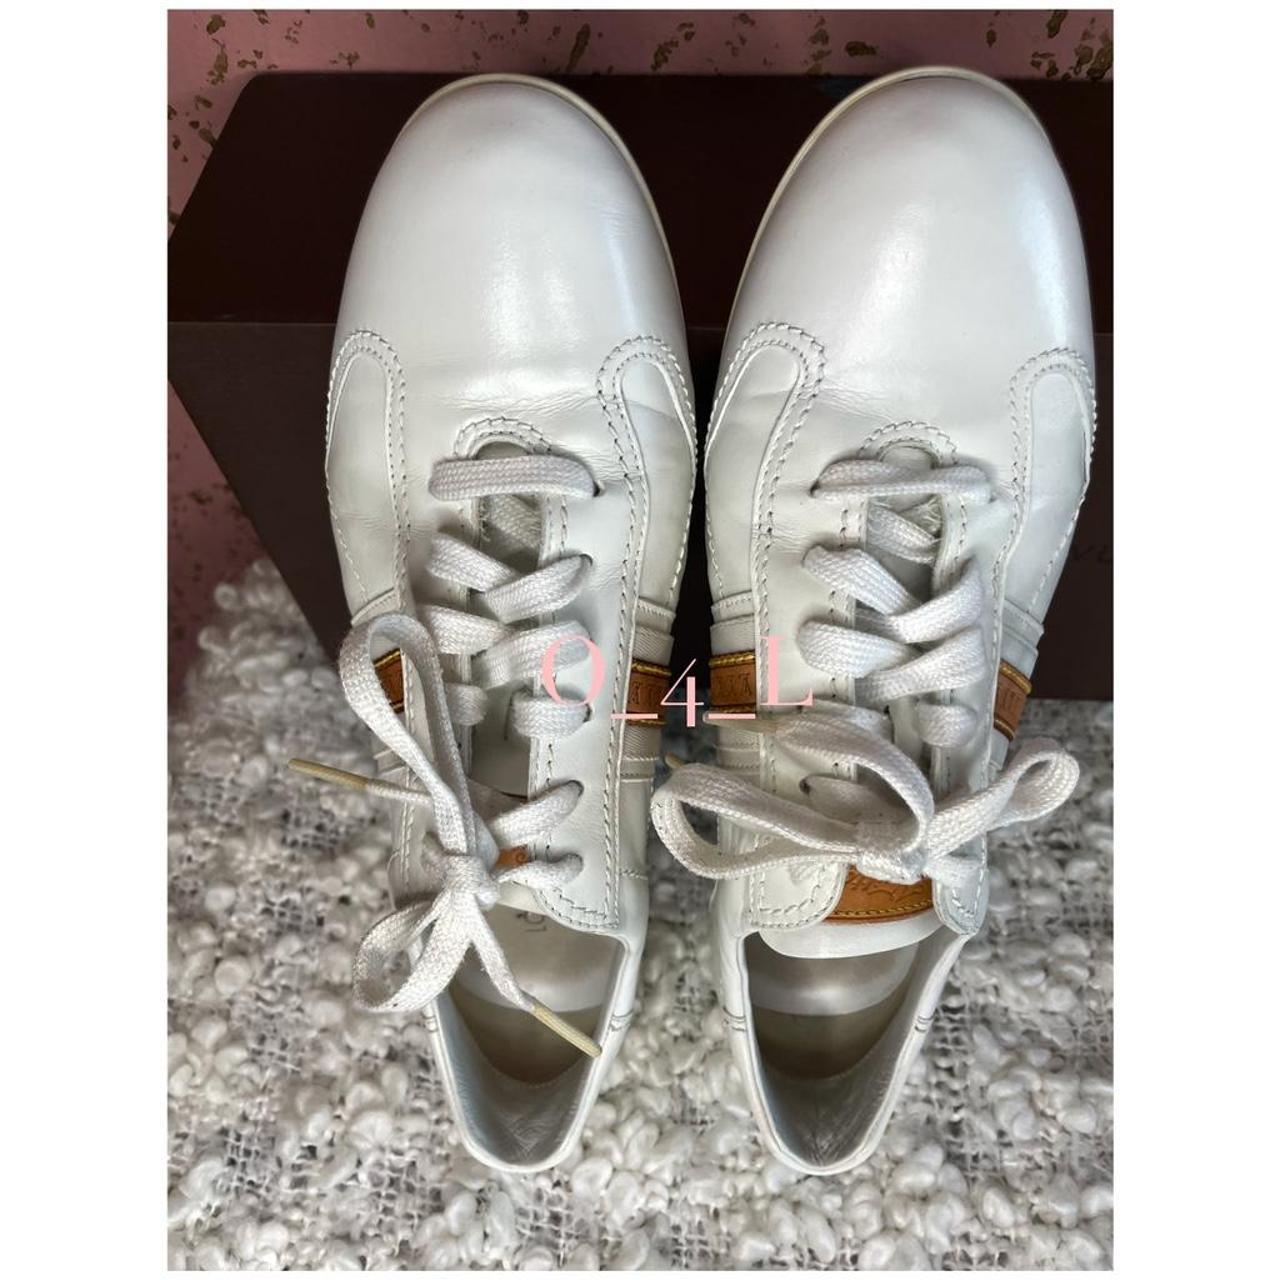 These vintage Louis Vuitton tennis shoes/sneakers